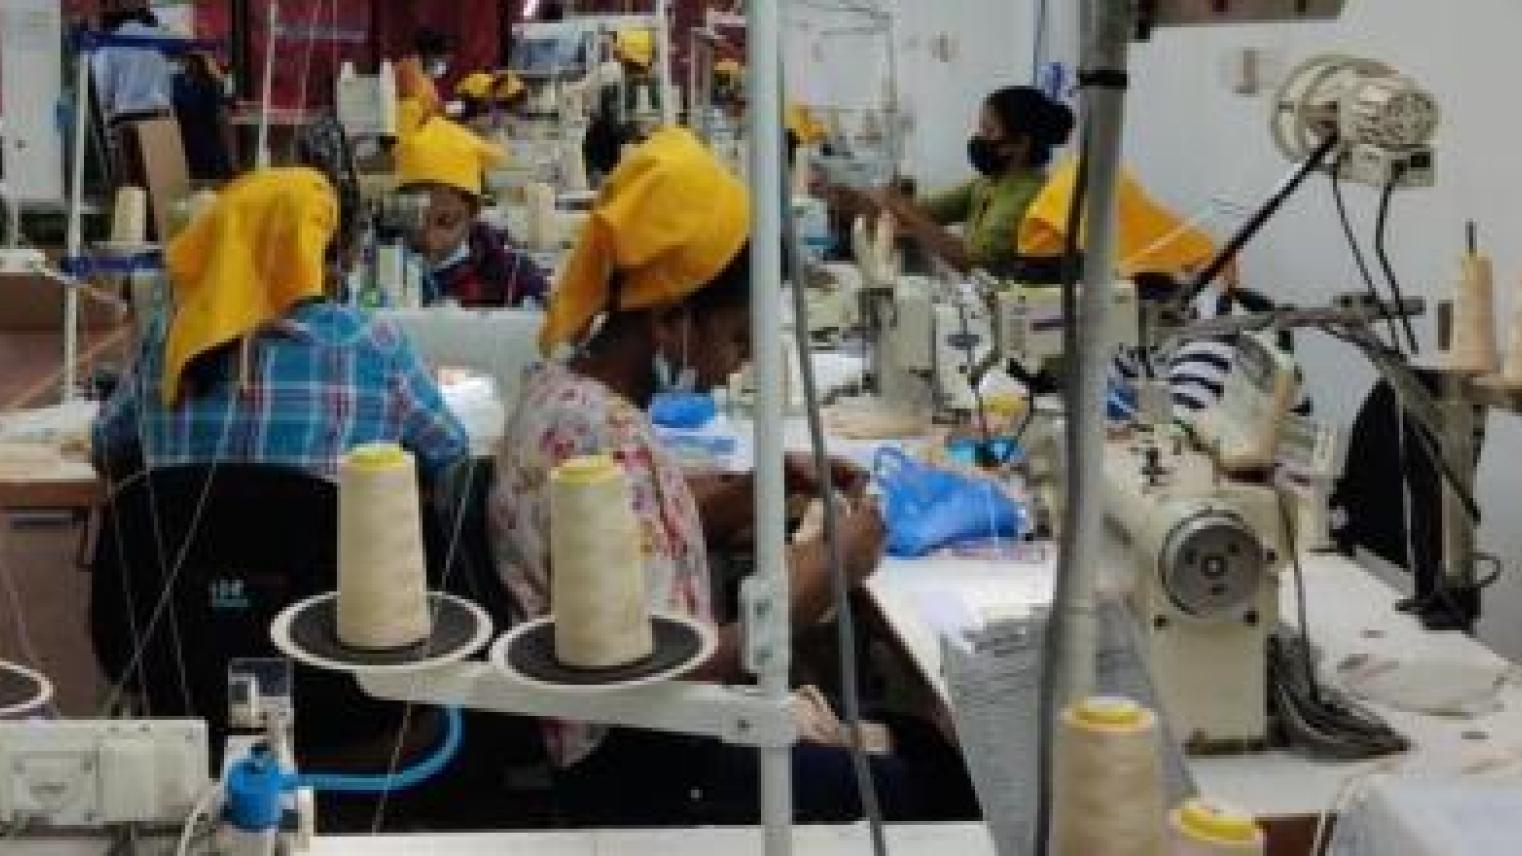 Image credit: Image of women garment workers in Sri Lanka; supplied by the presenter.